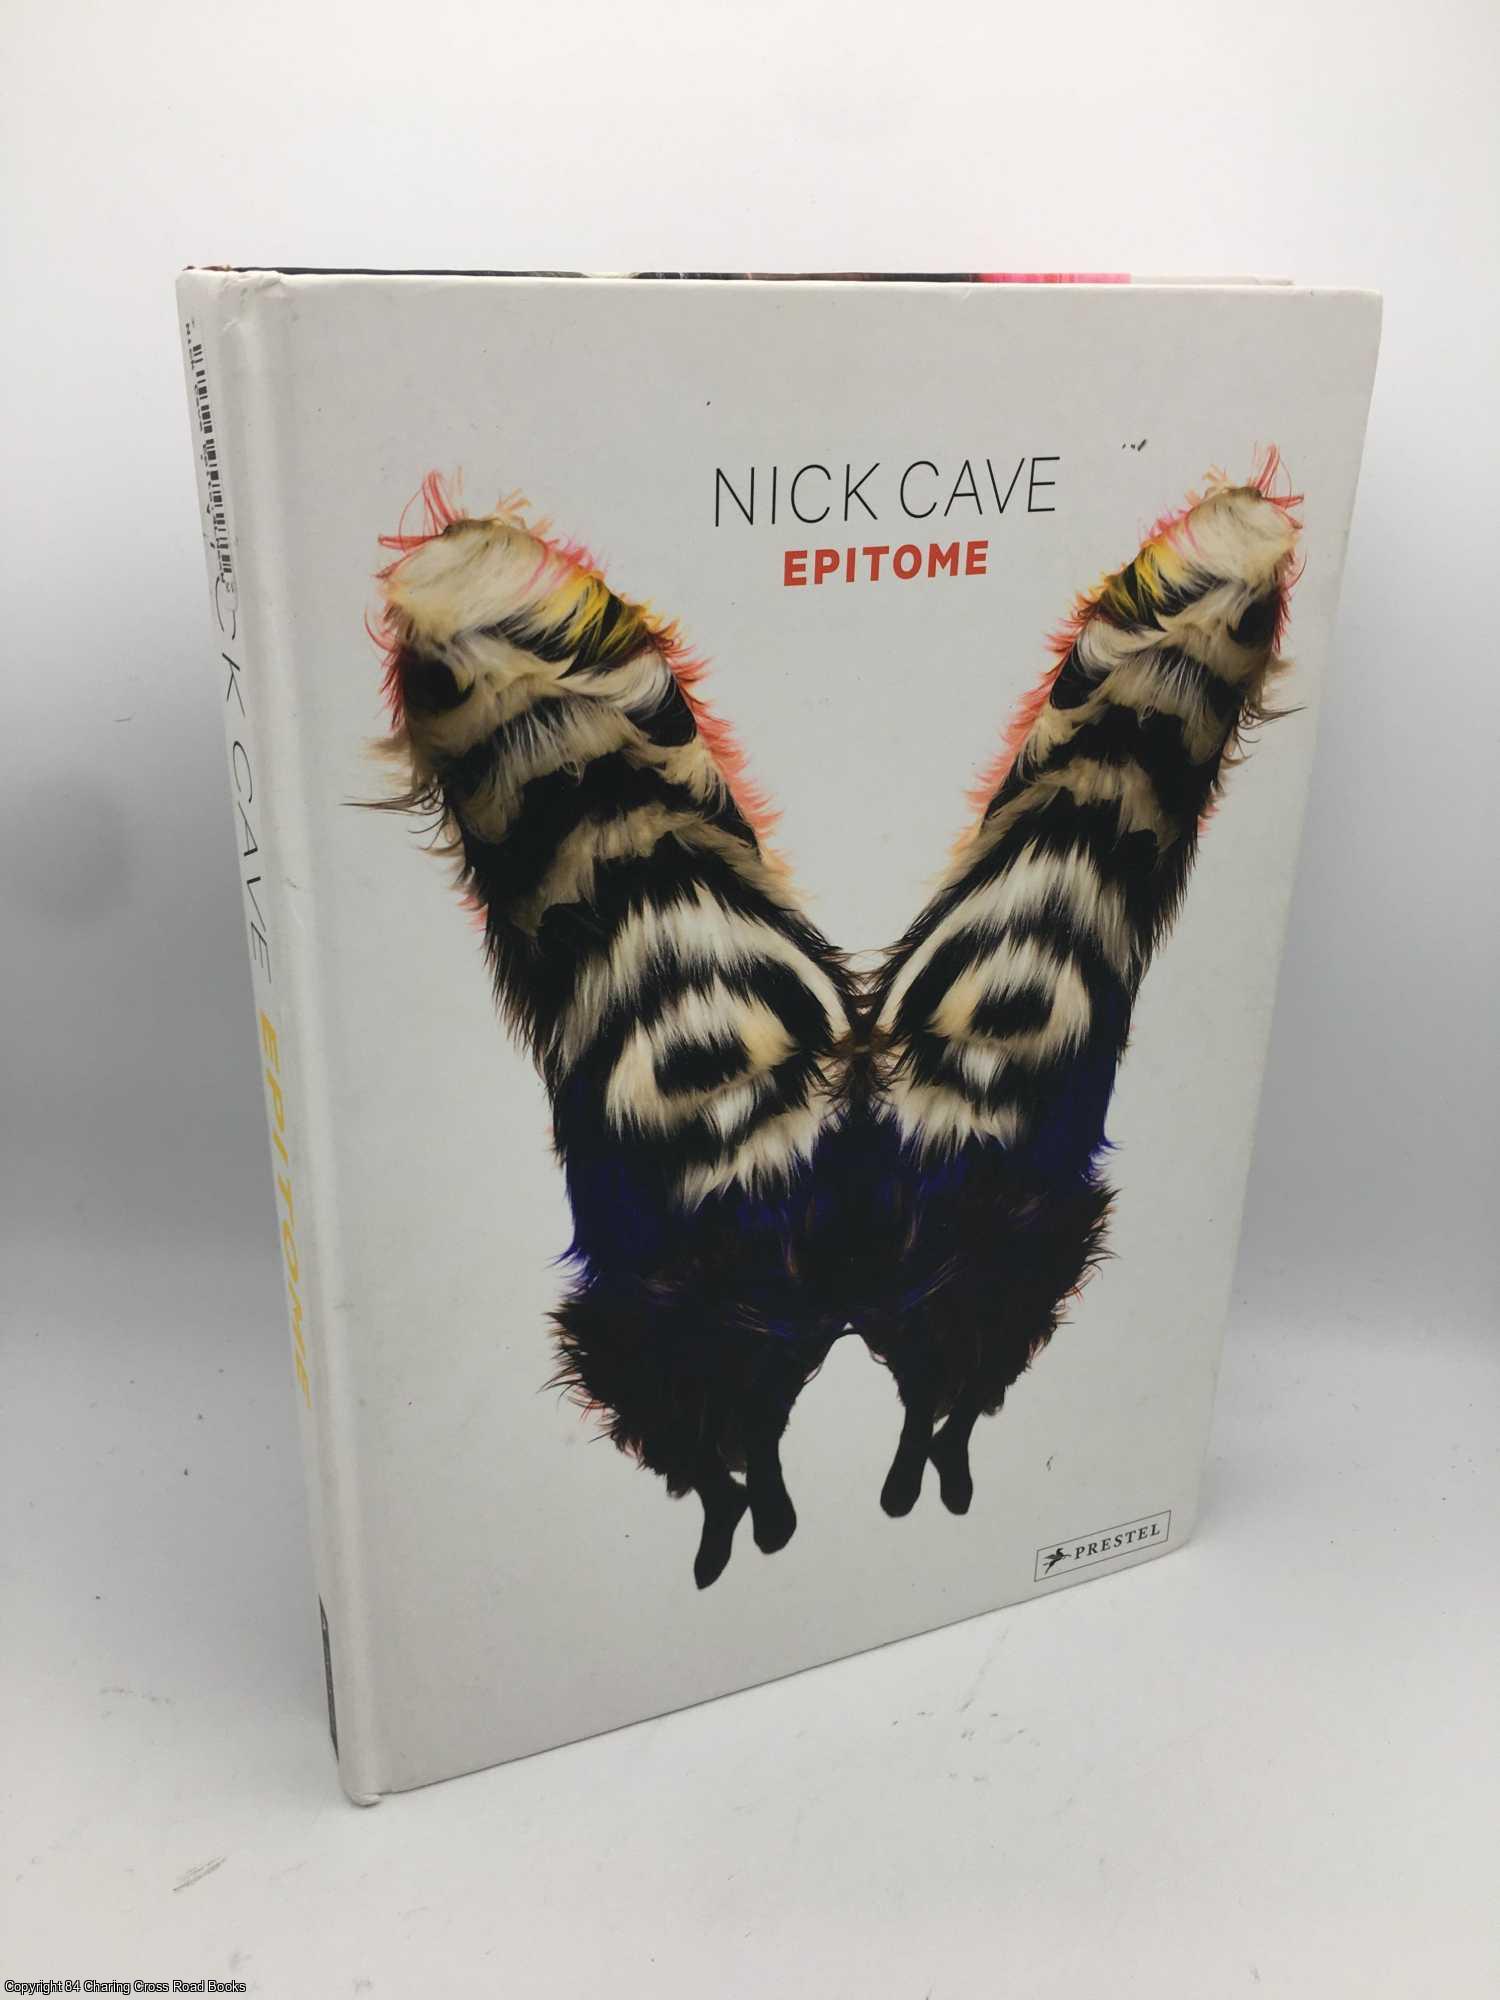 Bolton, Andrew; Cave, Nick; Ose, Elvira - Nick Cave: Epitome